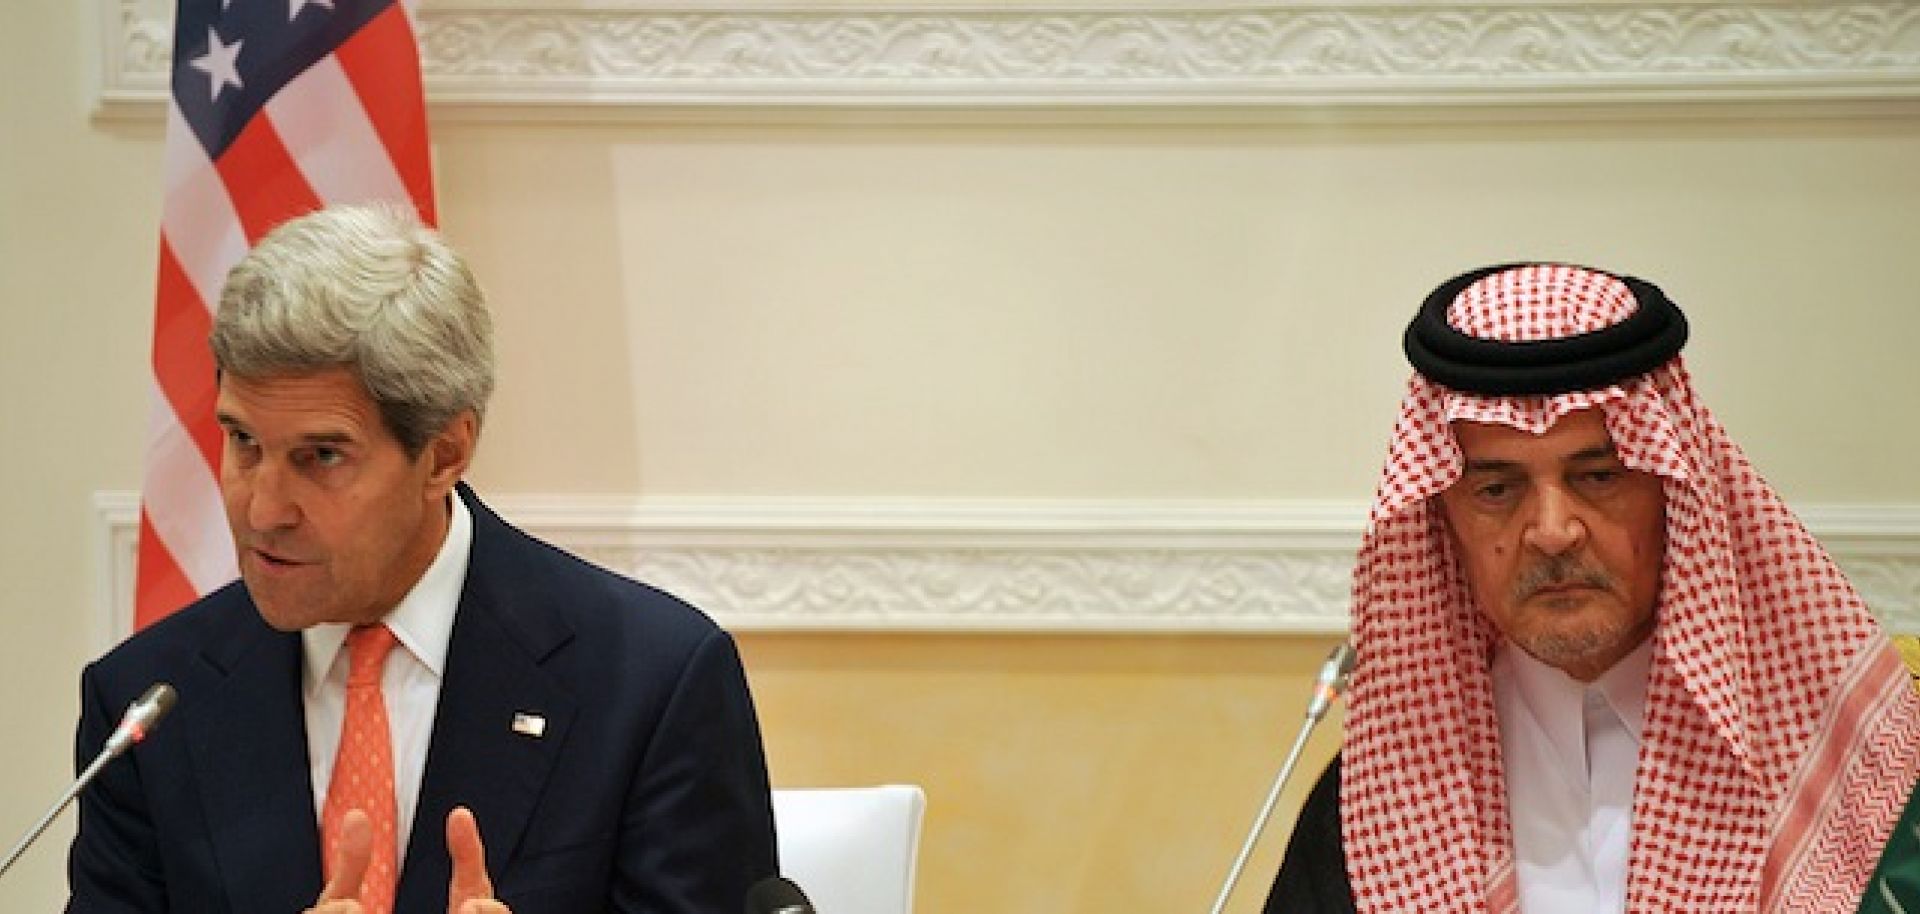 U.S. Secretary of State John Kerry (L) and Saudi Foreign Minister Prince Saud al-Faisal at a news conference in Riyadh on Nov. 4.